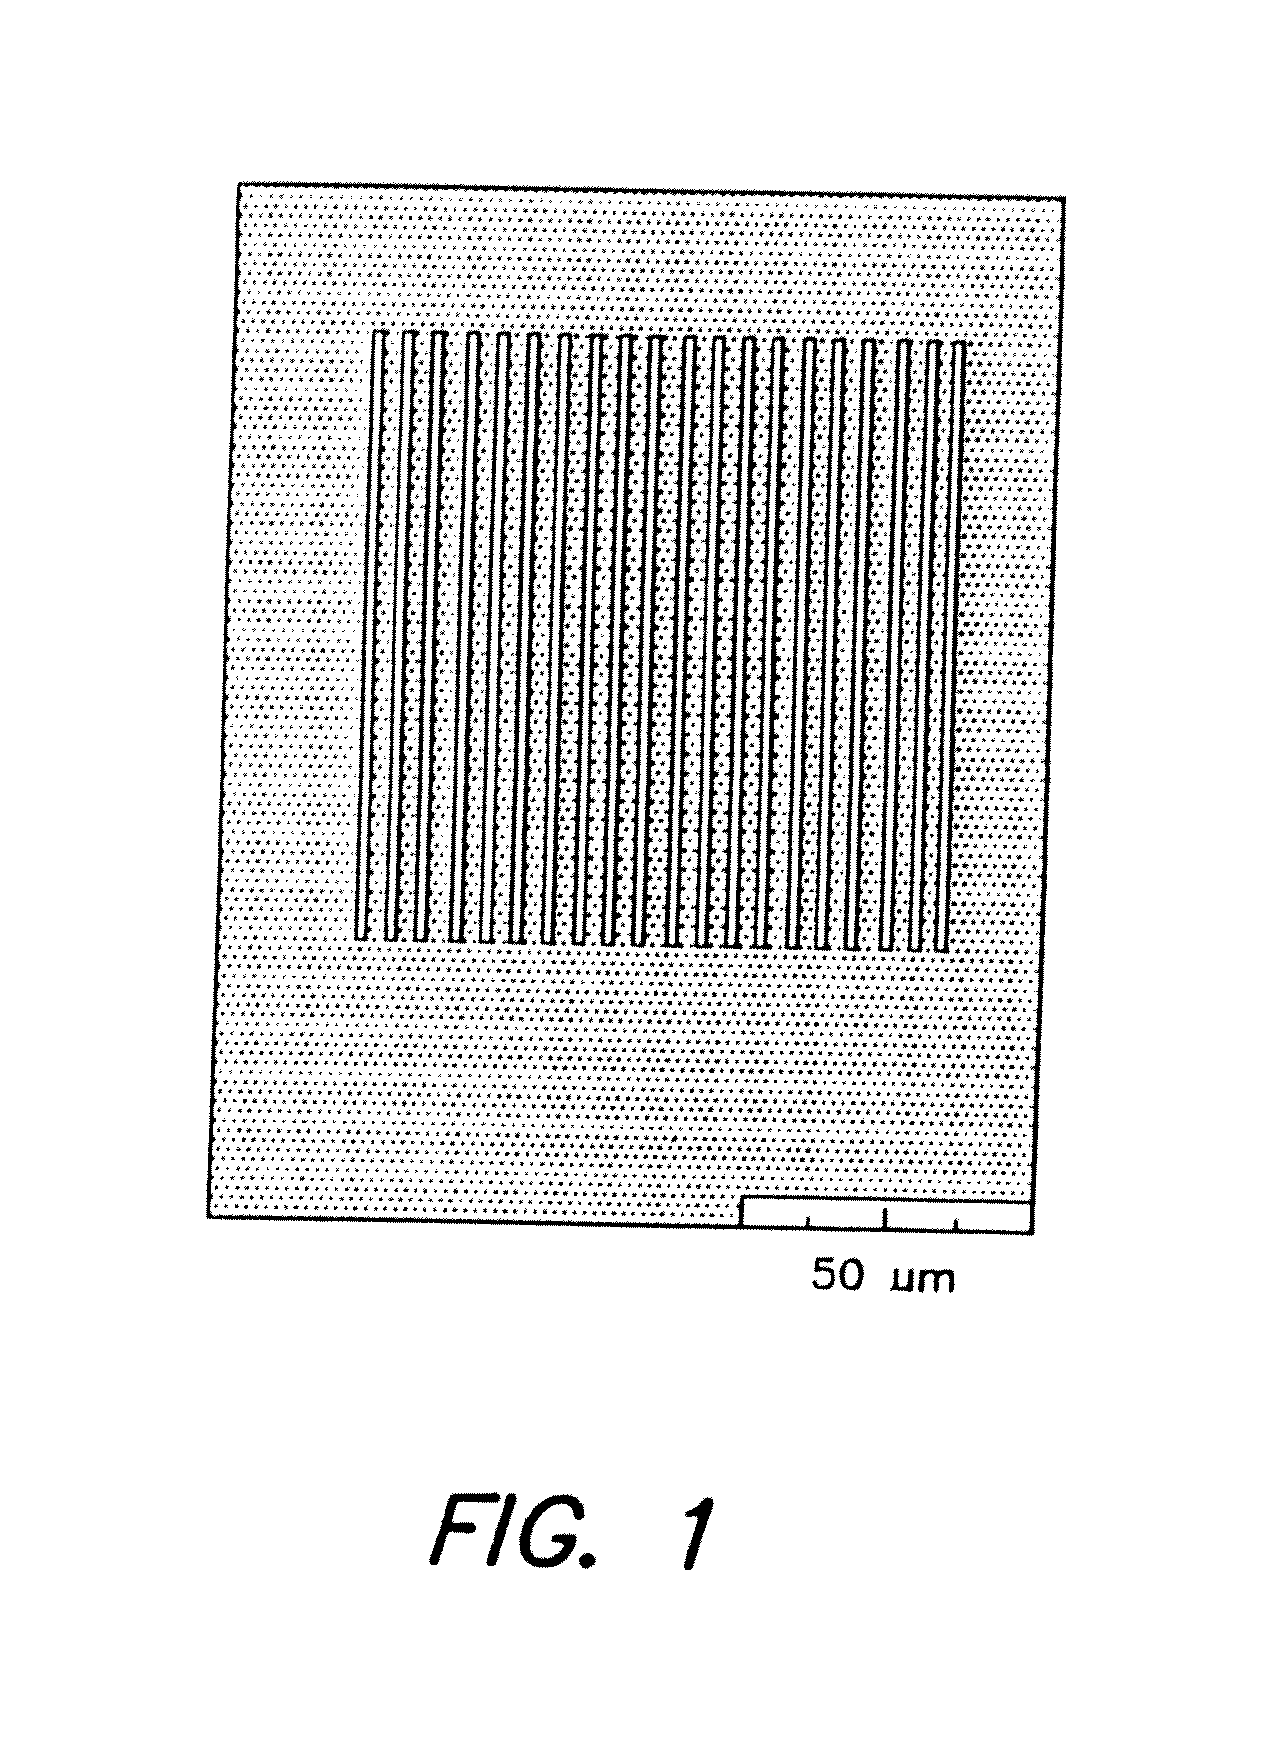 Optical Hydrogel Material with Photosensitizer and Method for Modifying the Refractive Index